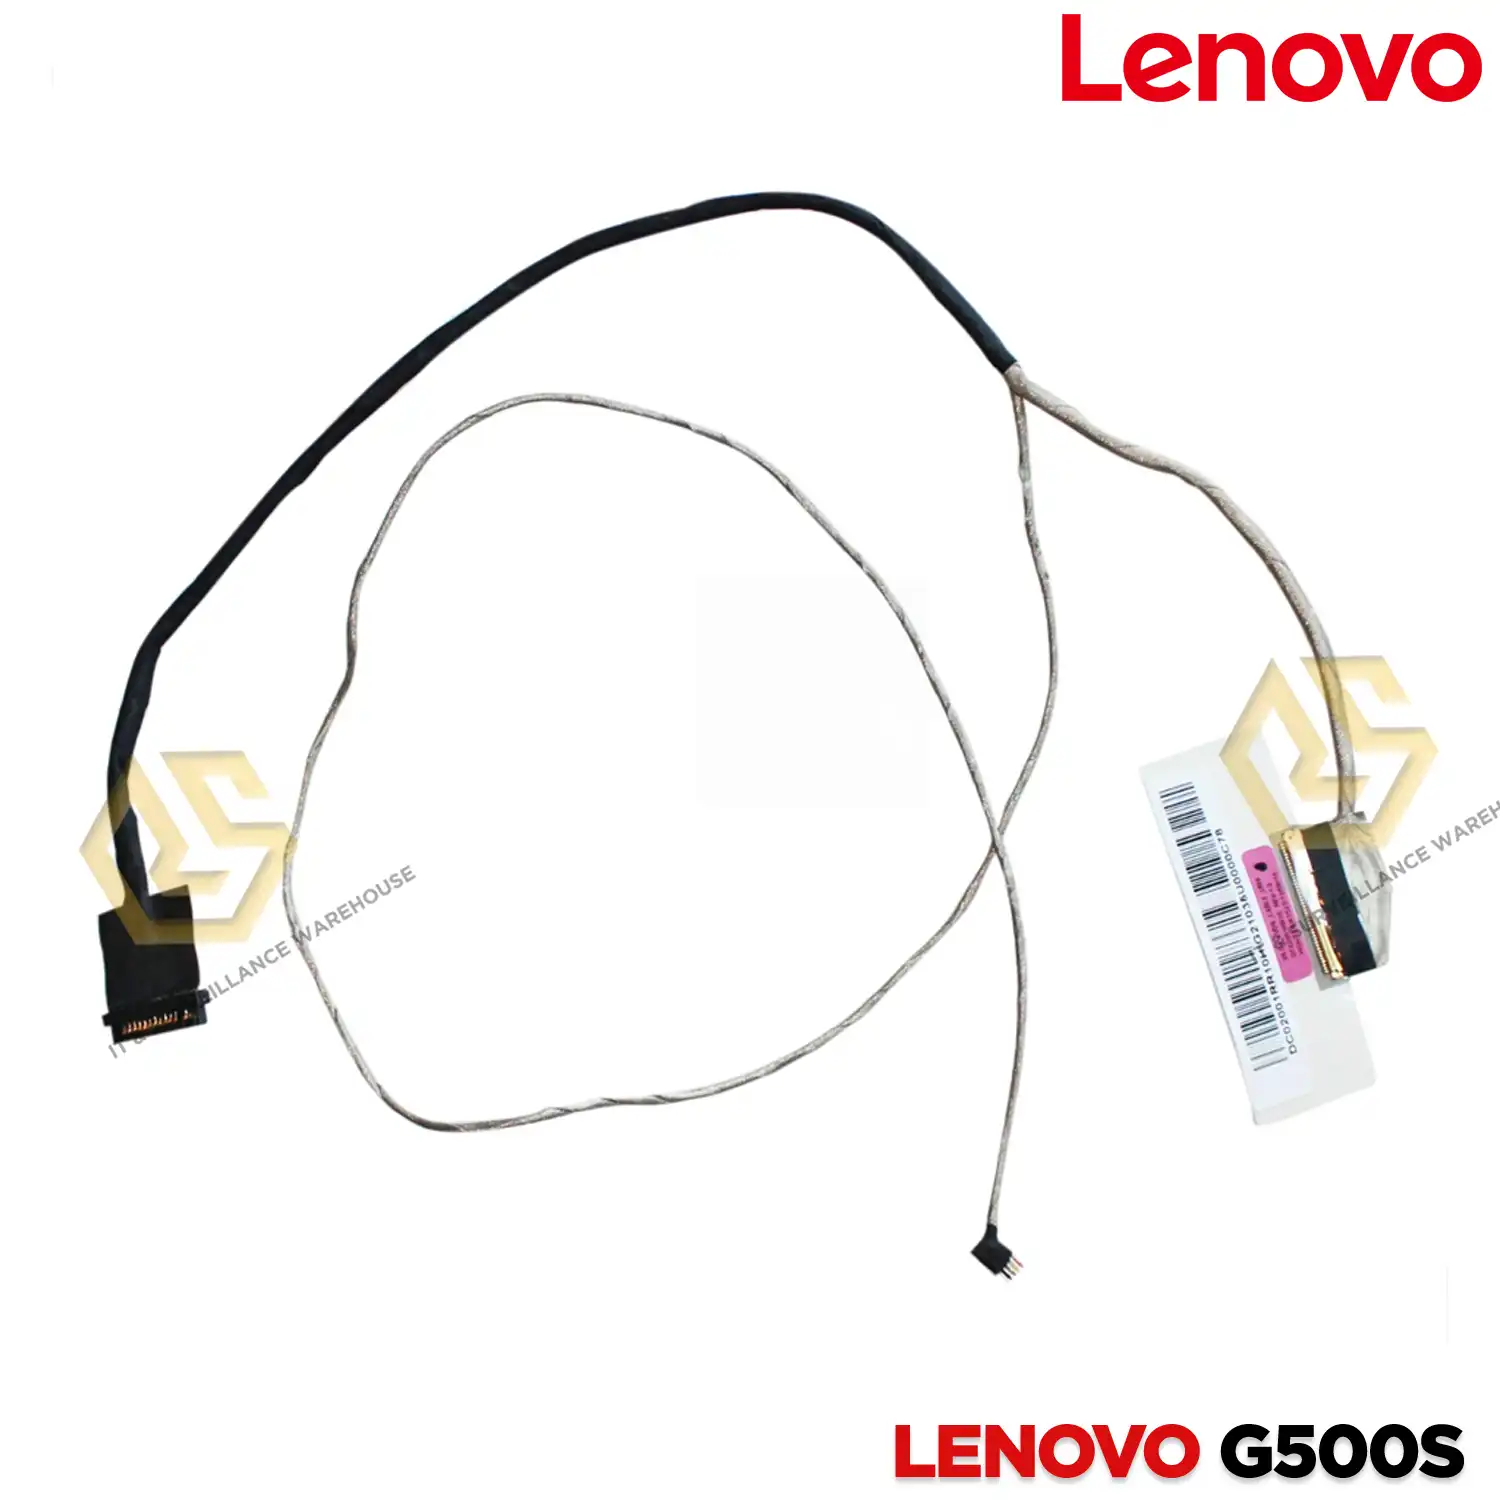 LAPTOP DISPLAY CABLE FOR LENOVO IDEAPAD G500S | G505S | G510S